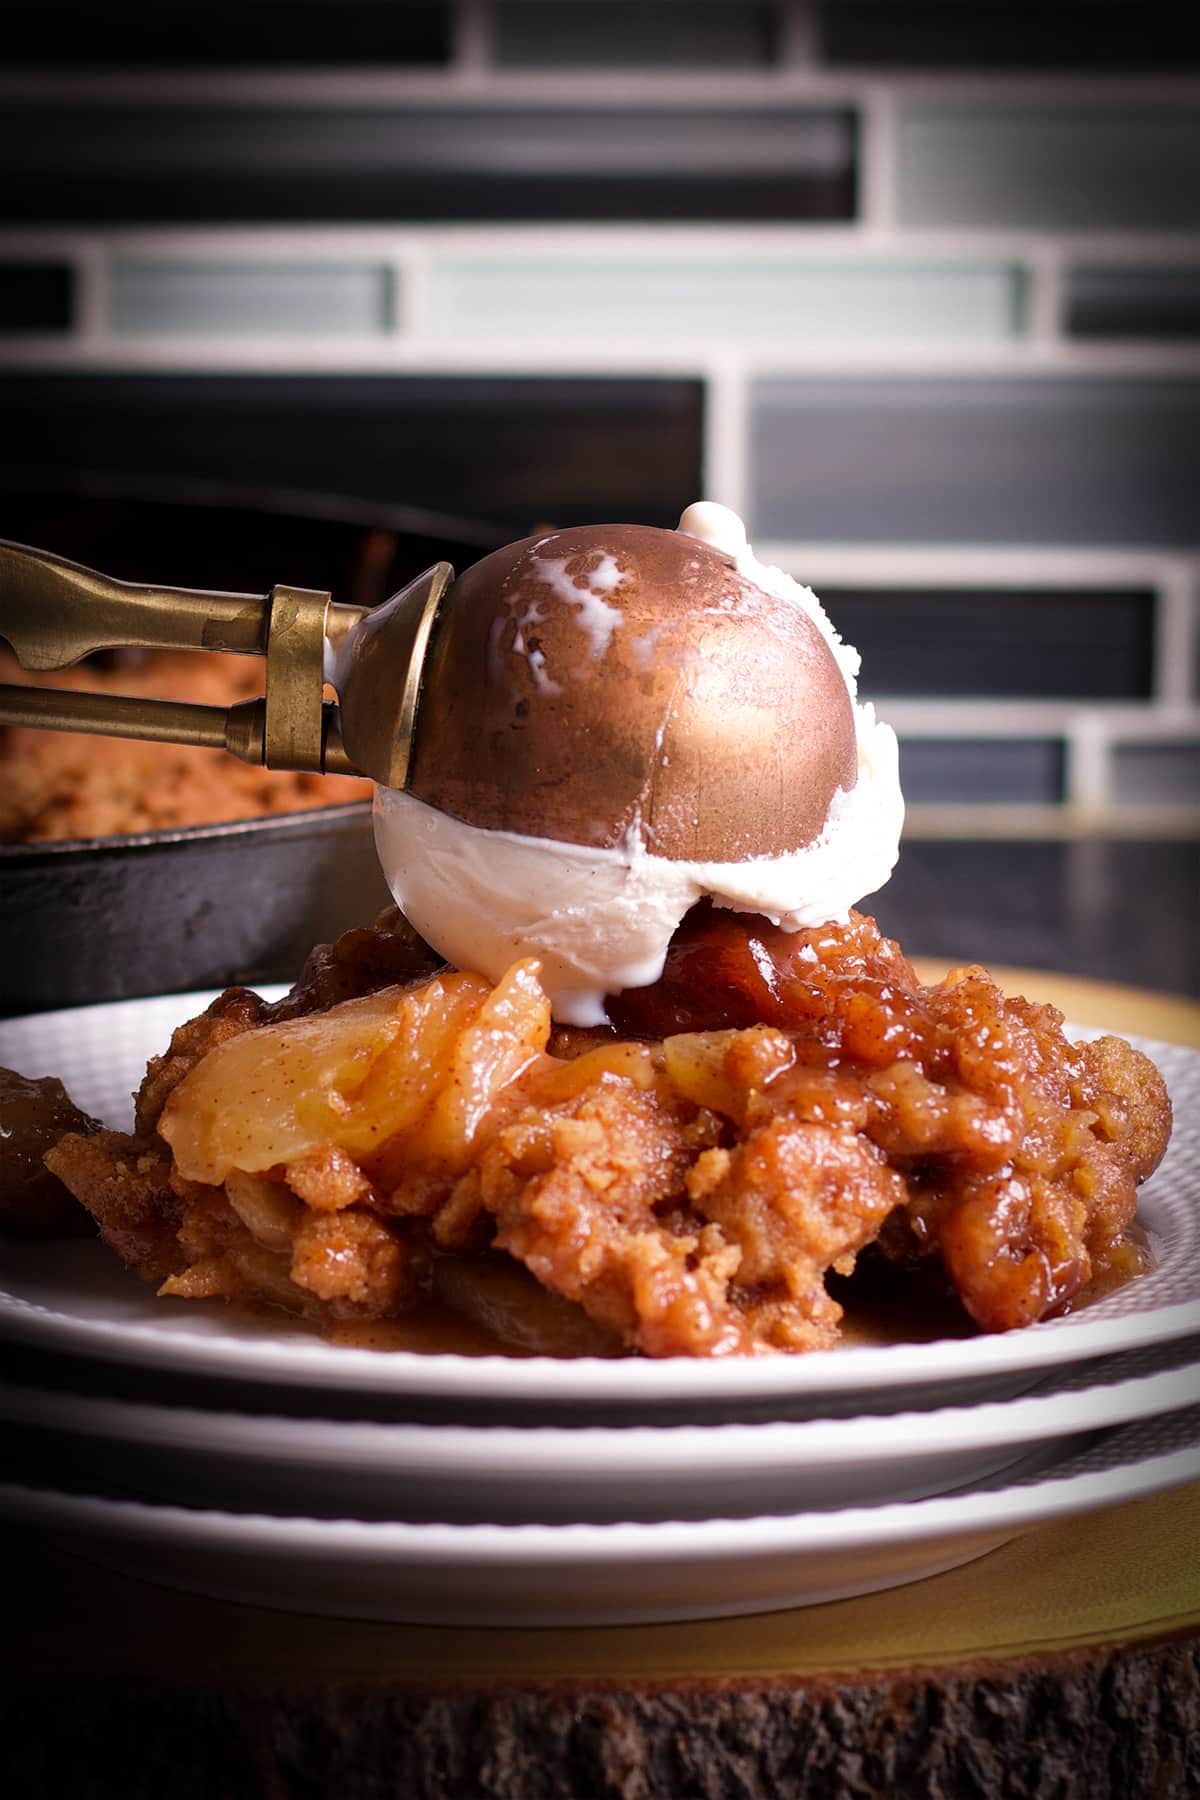 Someone using an old fashioned ice cream scoop to top a serving of apple cobbler with a scoop of vanilla ice cream.